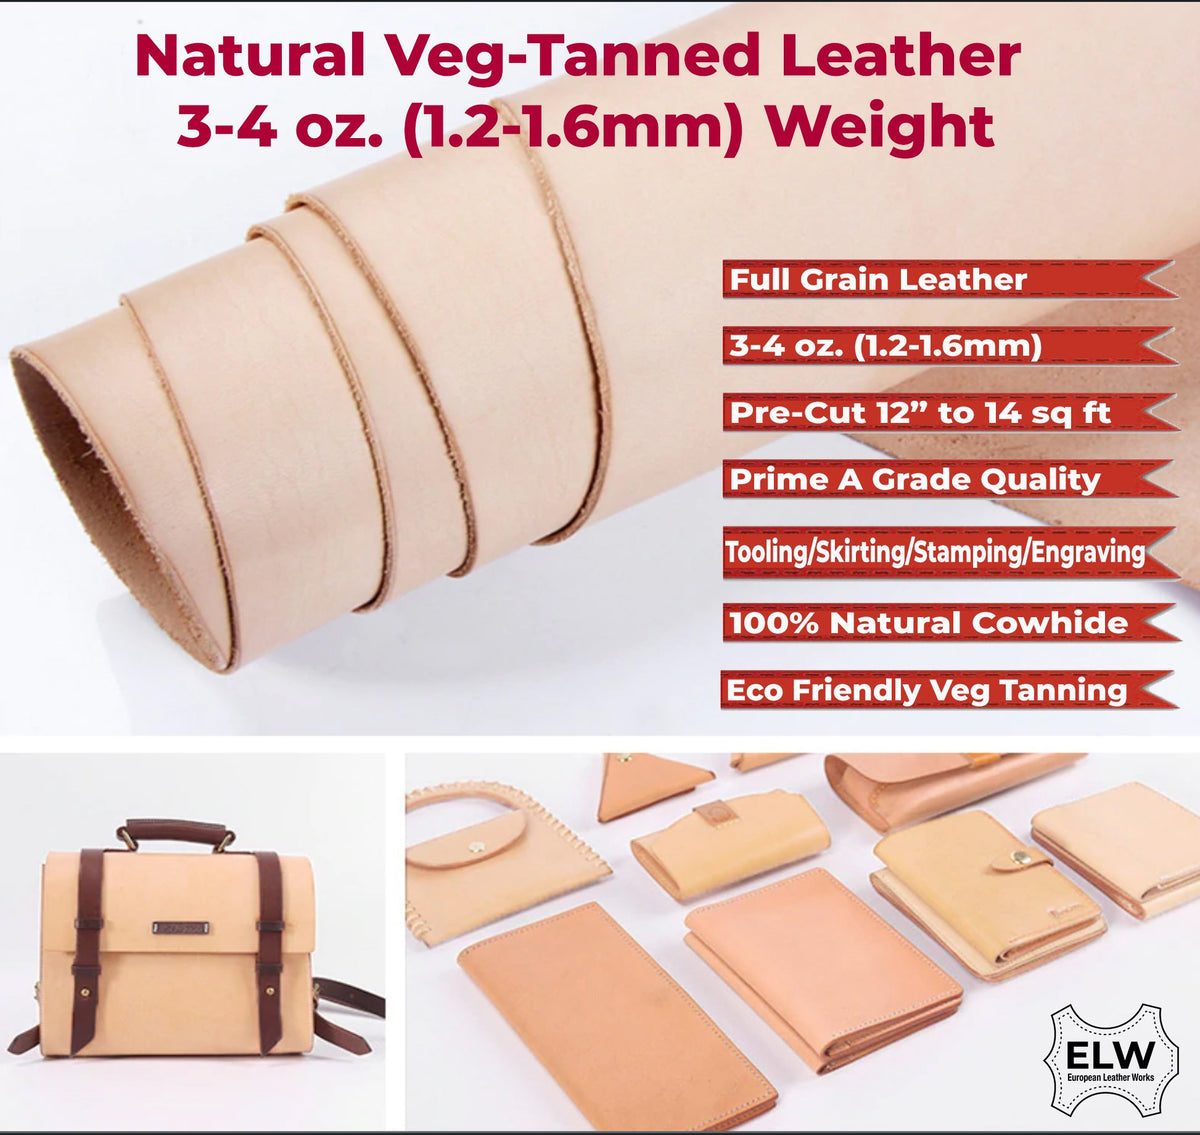 ELW 8-9 oz (3.2-3.6mm) Thickness Weight Pre-Cut 12x24 Vegetable Tanned  Leather Cowhide Grade AB Full Grain Leather for Tooling, Carving,  Engraving